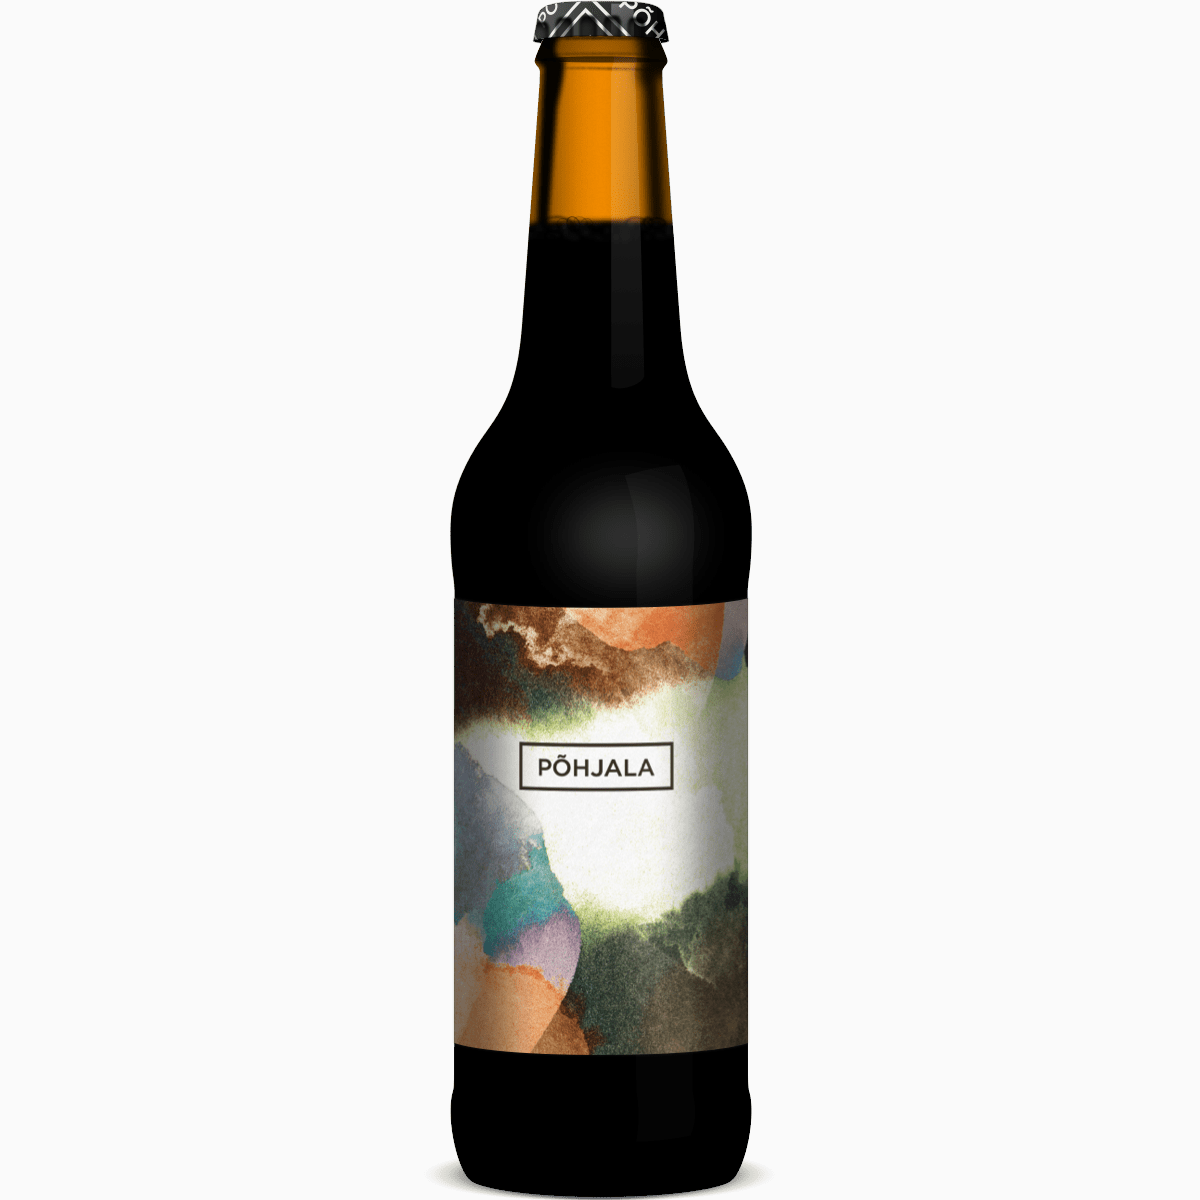 POHJALA Mudcake Bänger – Imperial Stout with chocolate